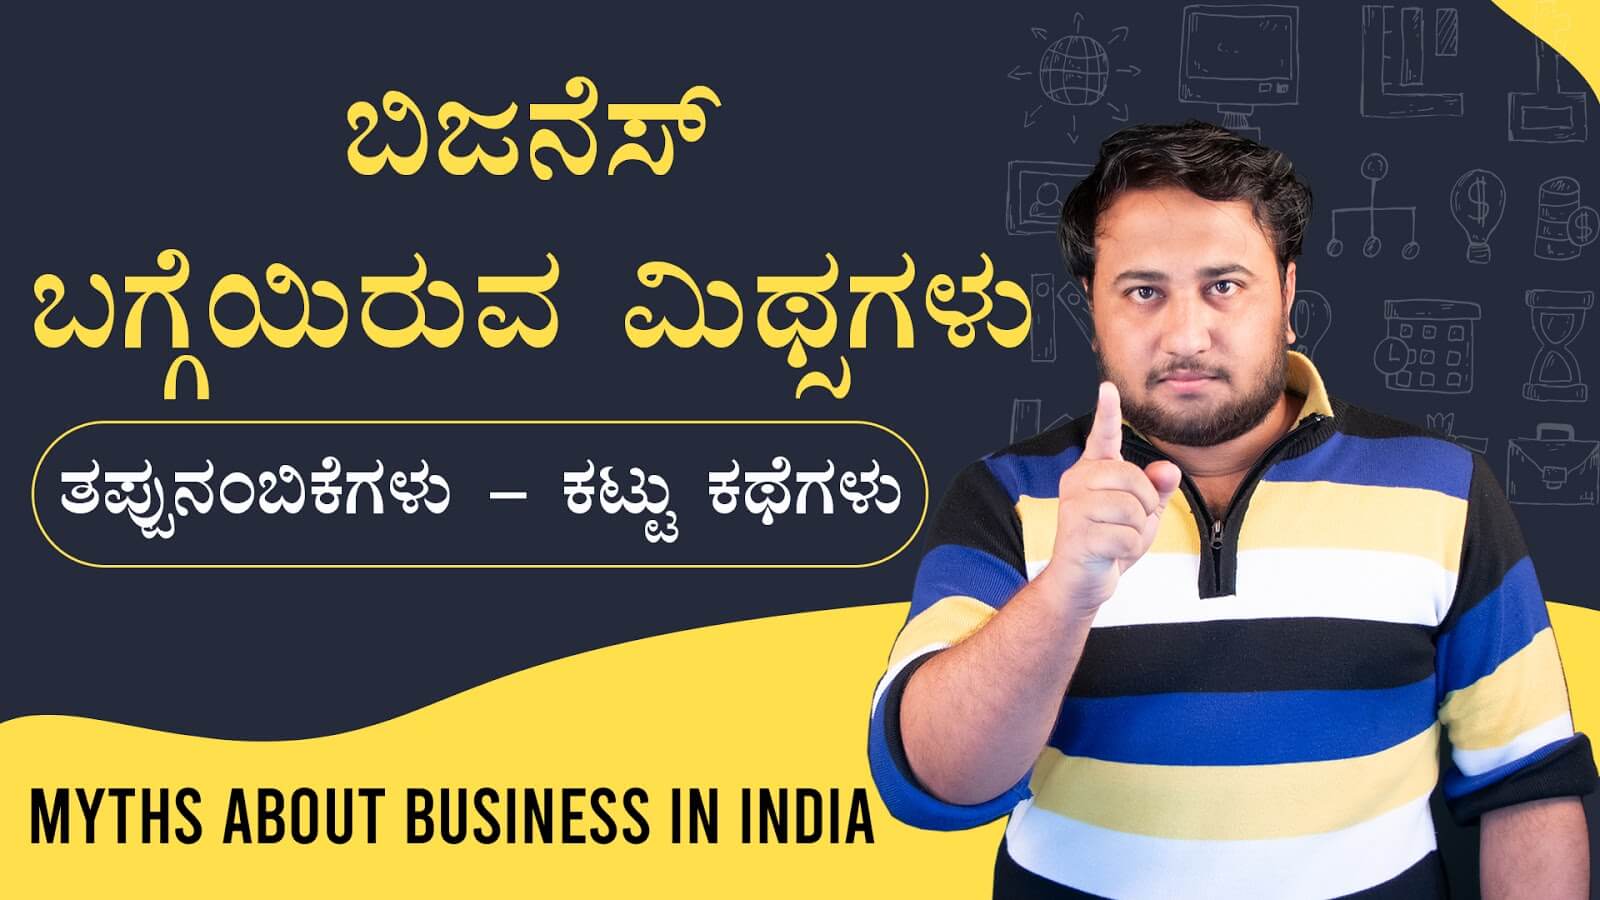 You are currently viewing ಬಿಜನೆಸ್ ಮಿಥ್ಸಗಳು : Myths about Business in India in Kannada